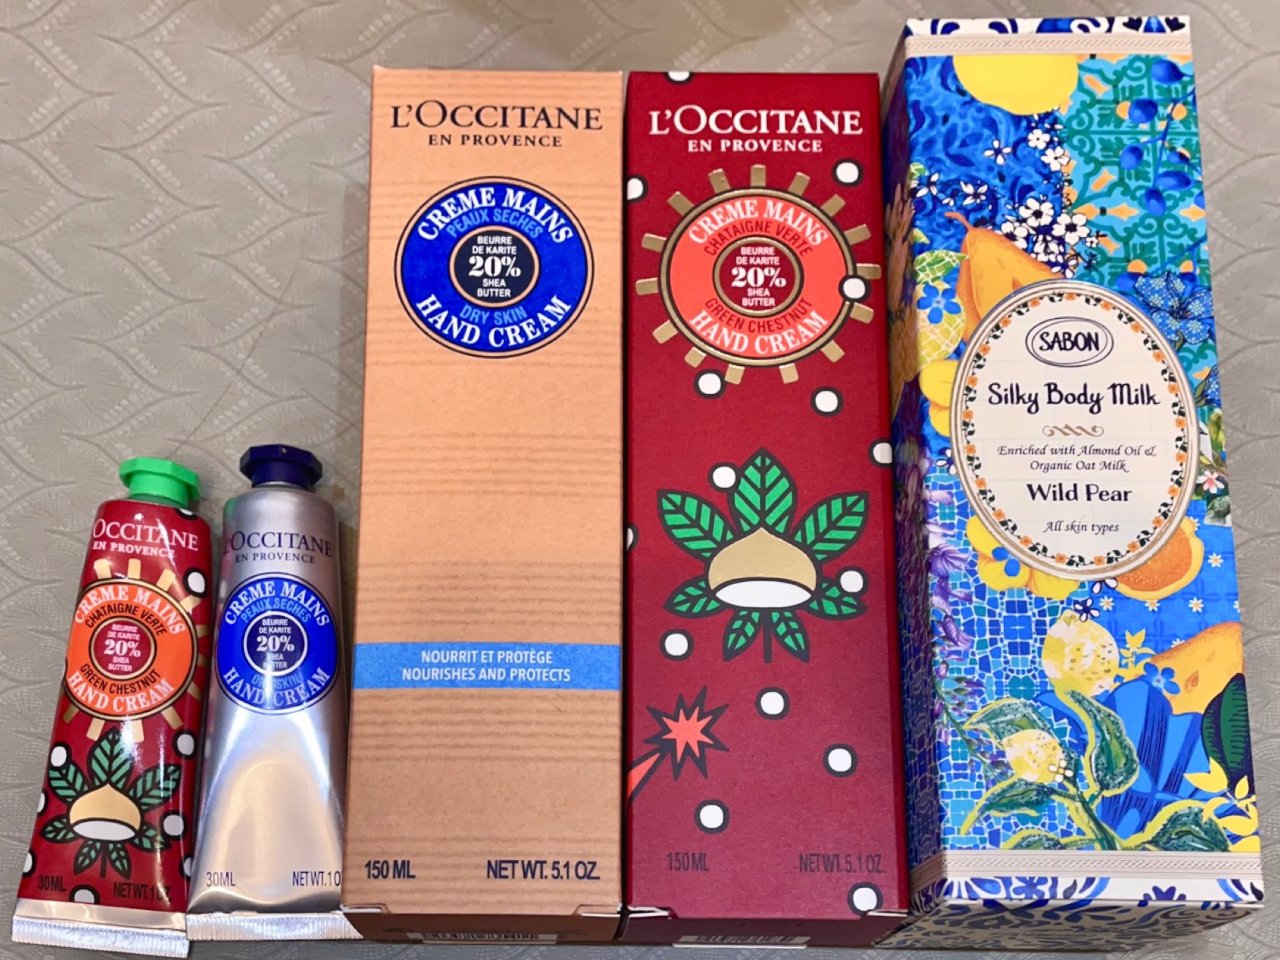 Natural Beauty From The South Of France | L'Occitane USA